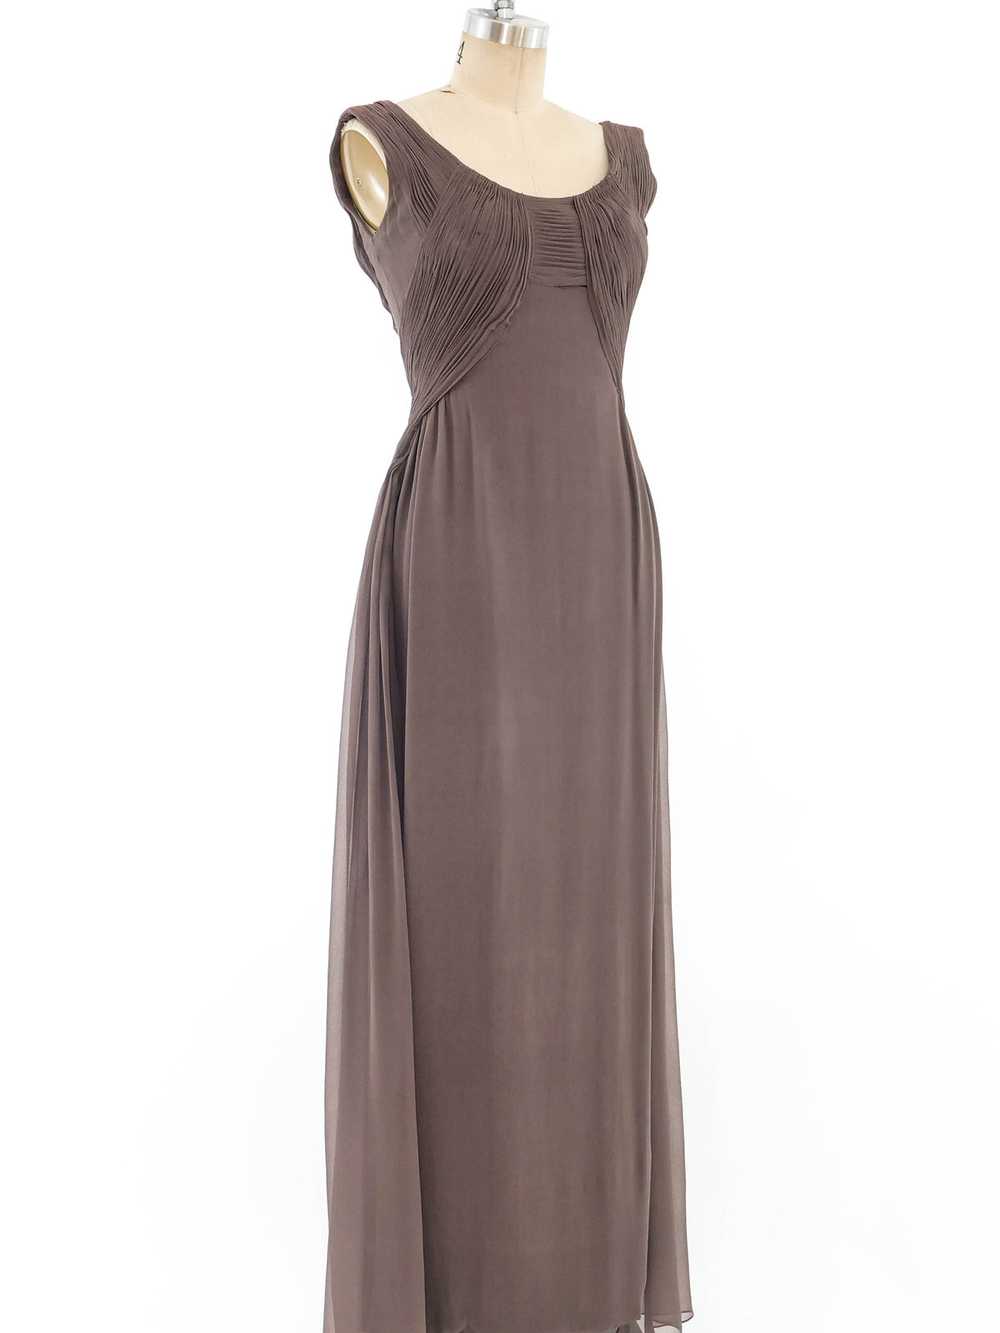 Ruched Silk Chiffon Gown - image 2